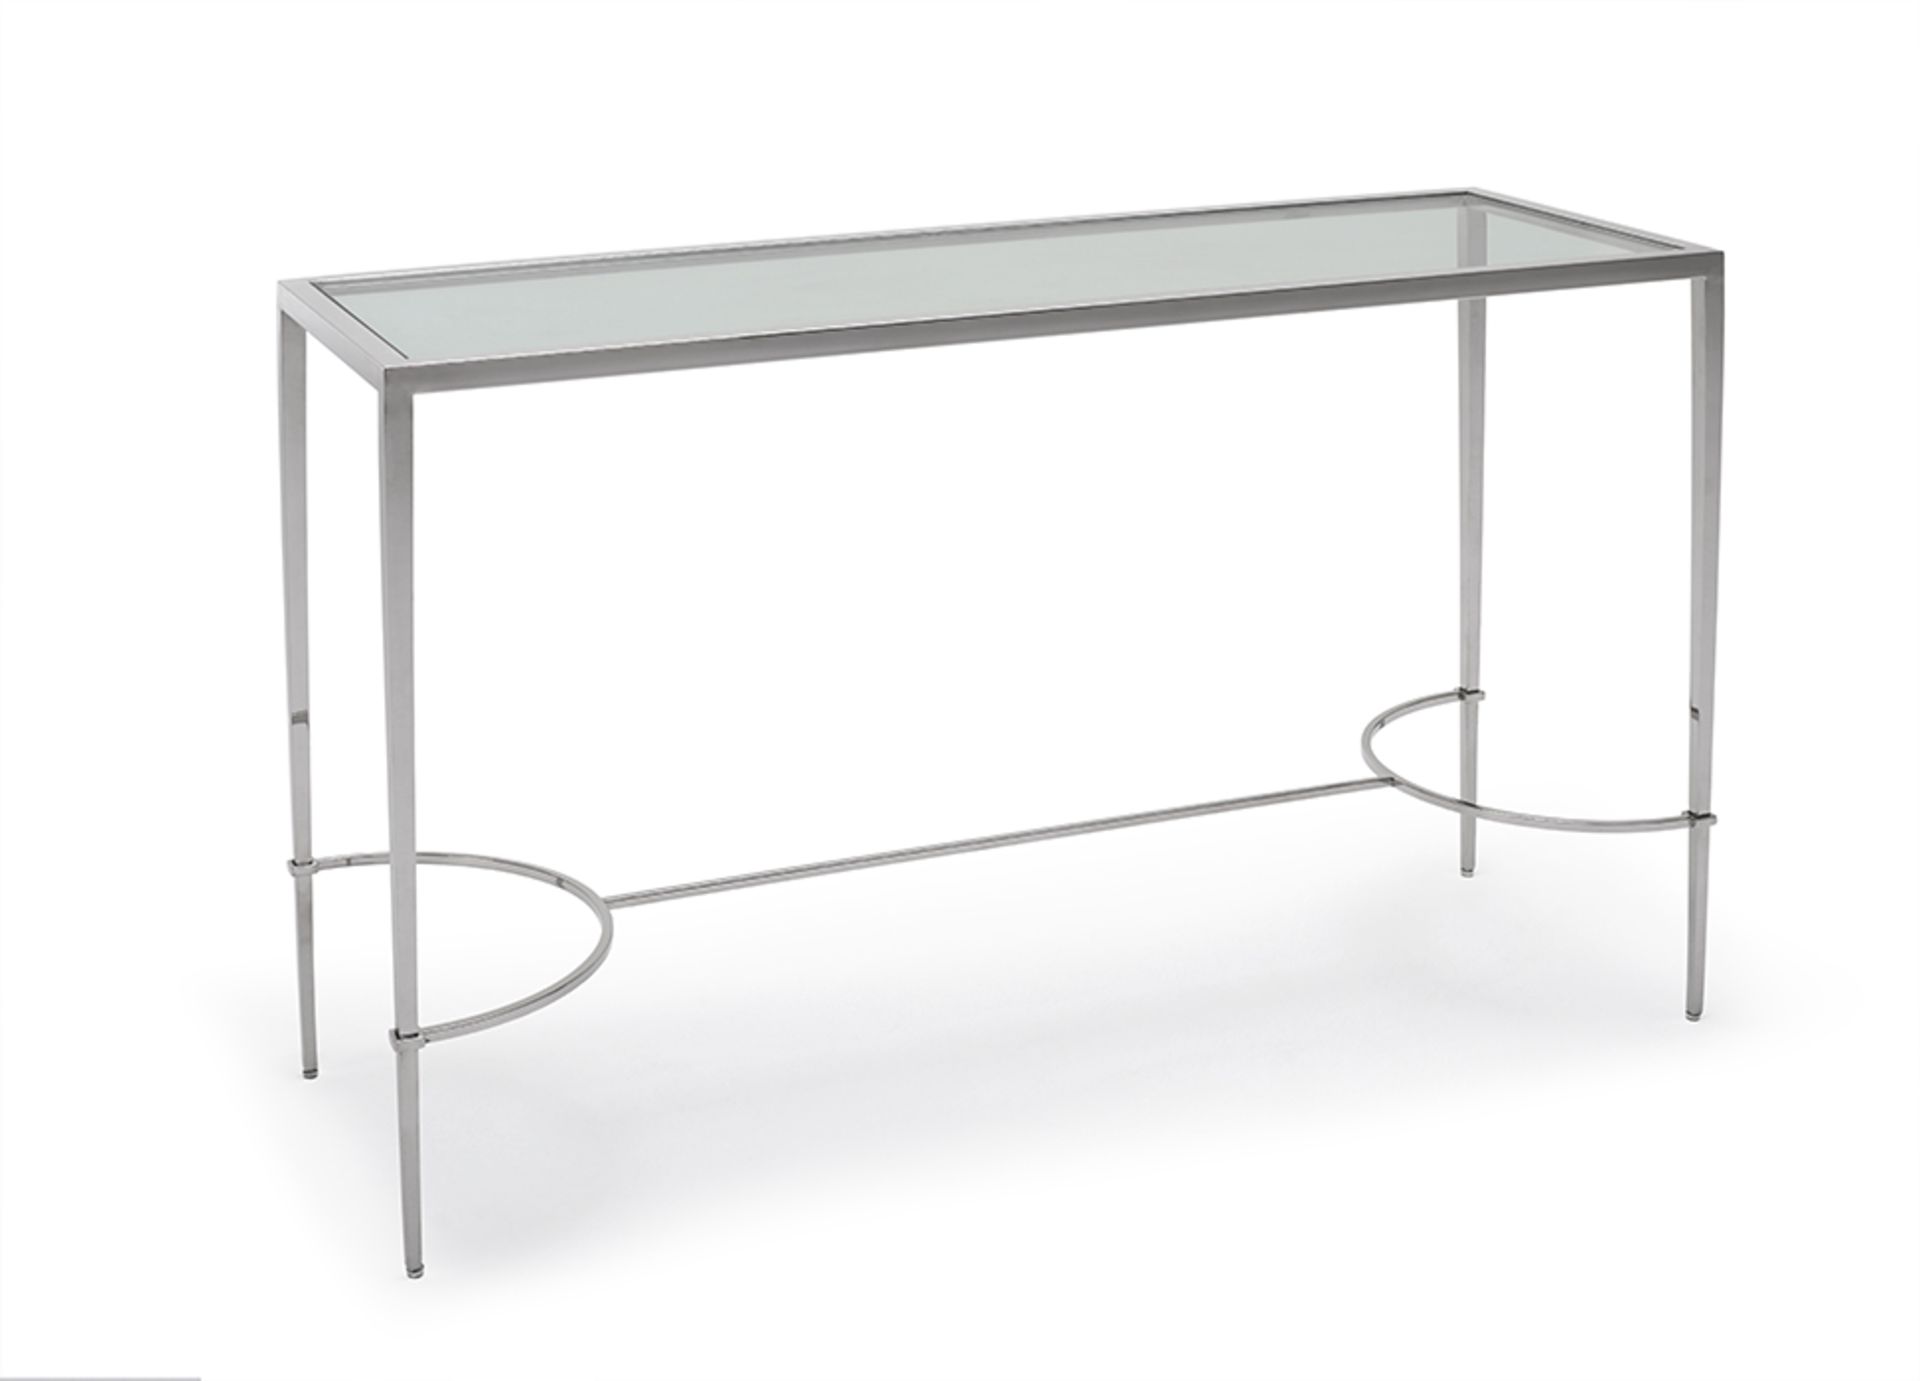 Tokyo Console Table by Kesterport The Tokyo console table with its clear glass top and a refined - Image 6 of 6